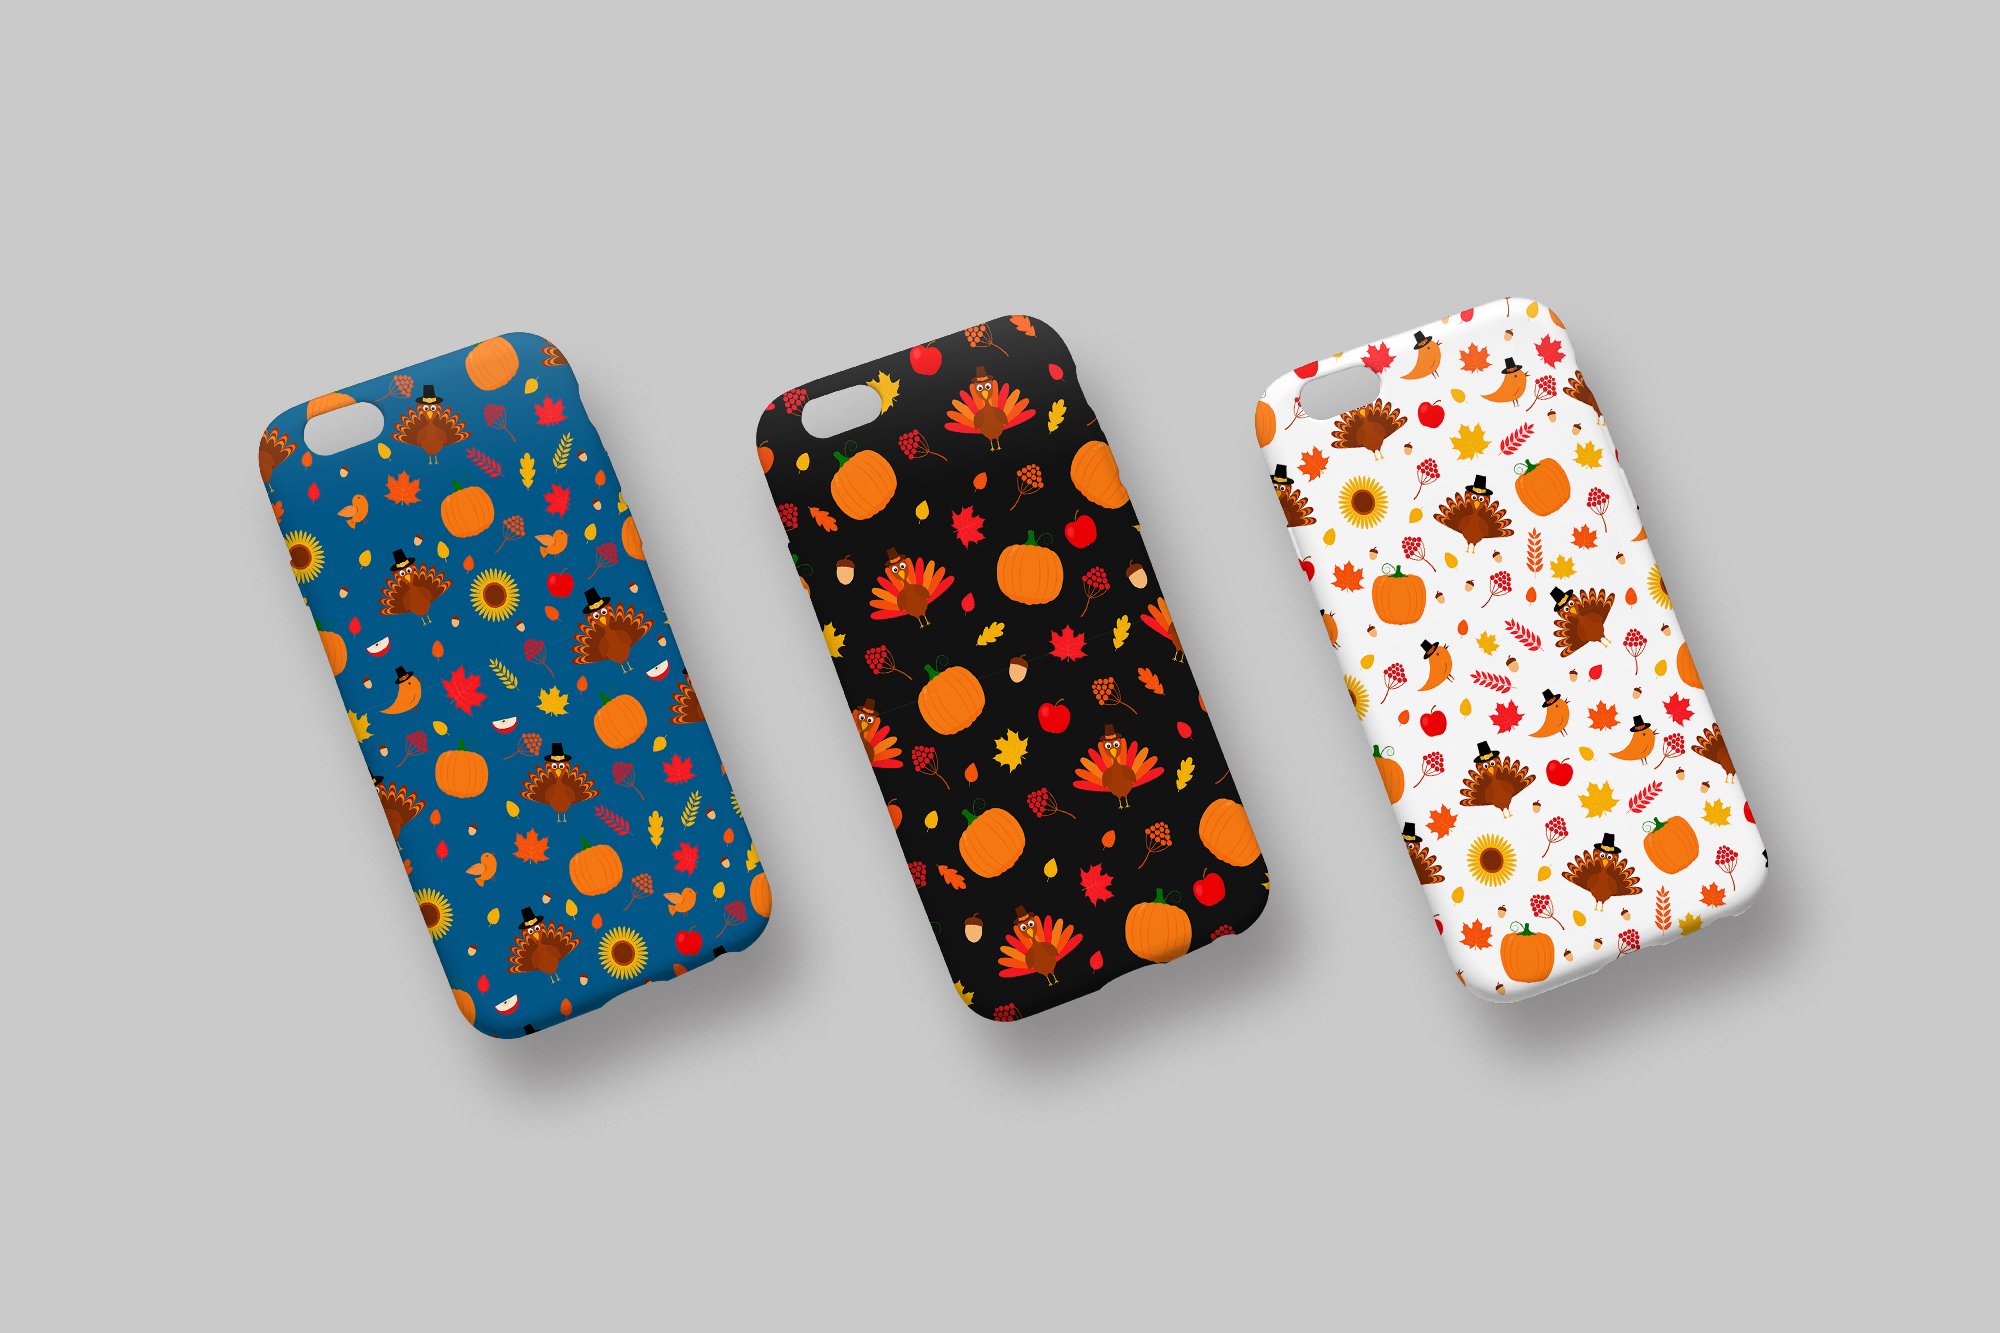 Some phone cases with Thanksgiving prints.